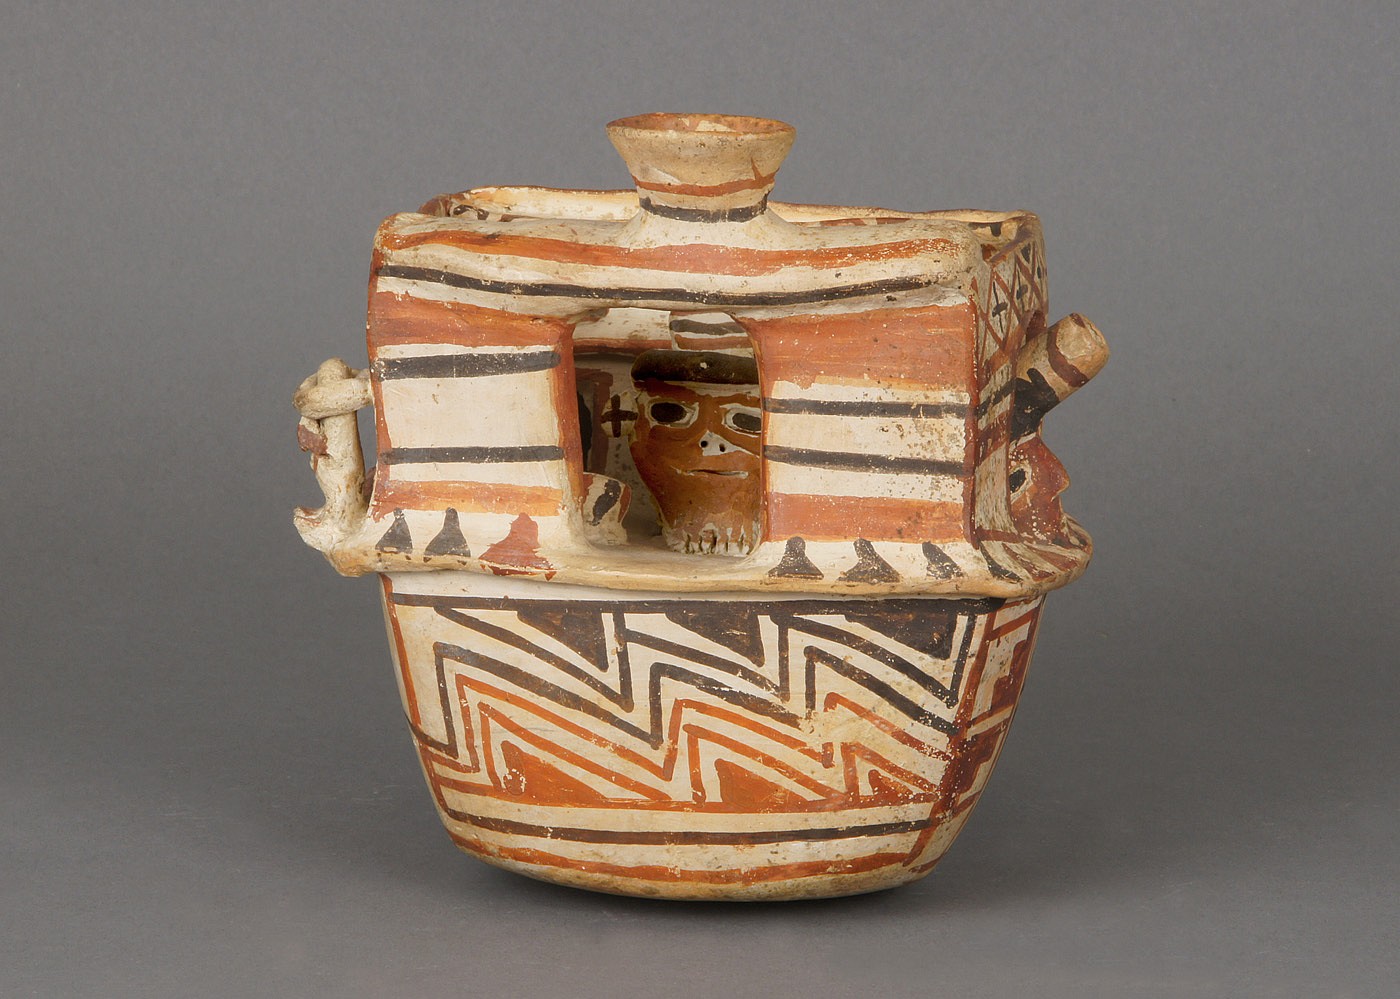 Peru, Recuay Ceramic House Scene
Creamware with geometric painted designs in red, orange and brown polychrome.  This is an elaborate house model with six figures modeled inside. This is one of the few houses with two windows and a door, as most of the known examples have only one opening. The house is also a good example of negative resist decoration, which was characteristic of Recuay ceramics. Similar examples are illustrated in Lapiner, "Pre-Columbian Art of South America" (1976: pls. 422 and 433).
Media: Ceramic
Dimensions: Length: 5 in x Width: 5 in. x Height: 5 in.
$8,000
M2032